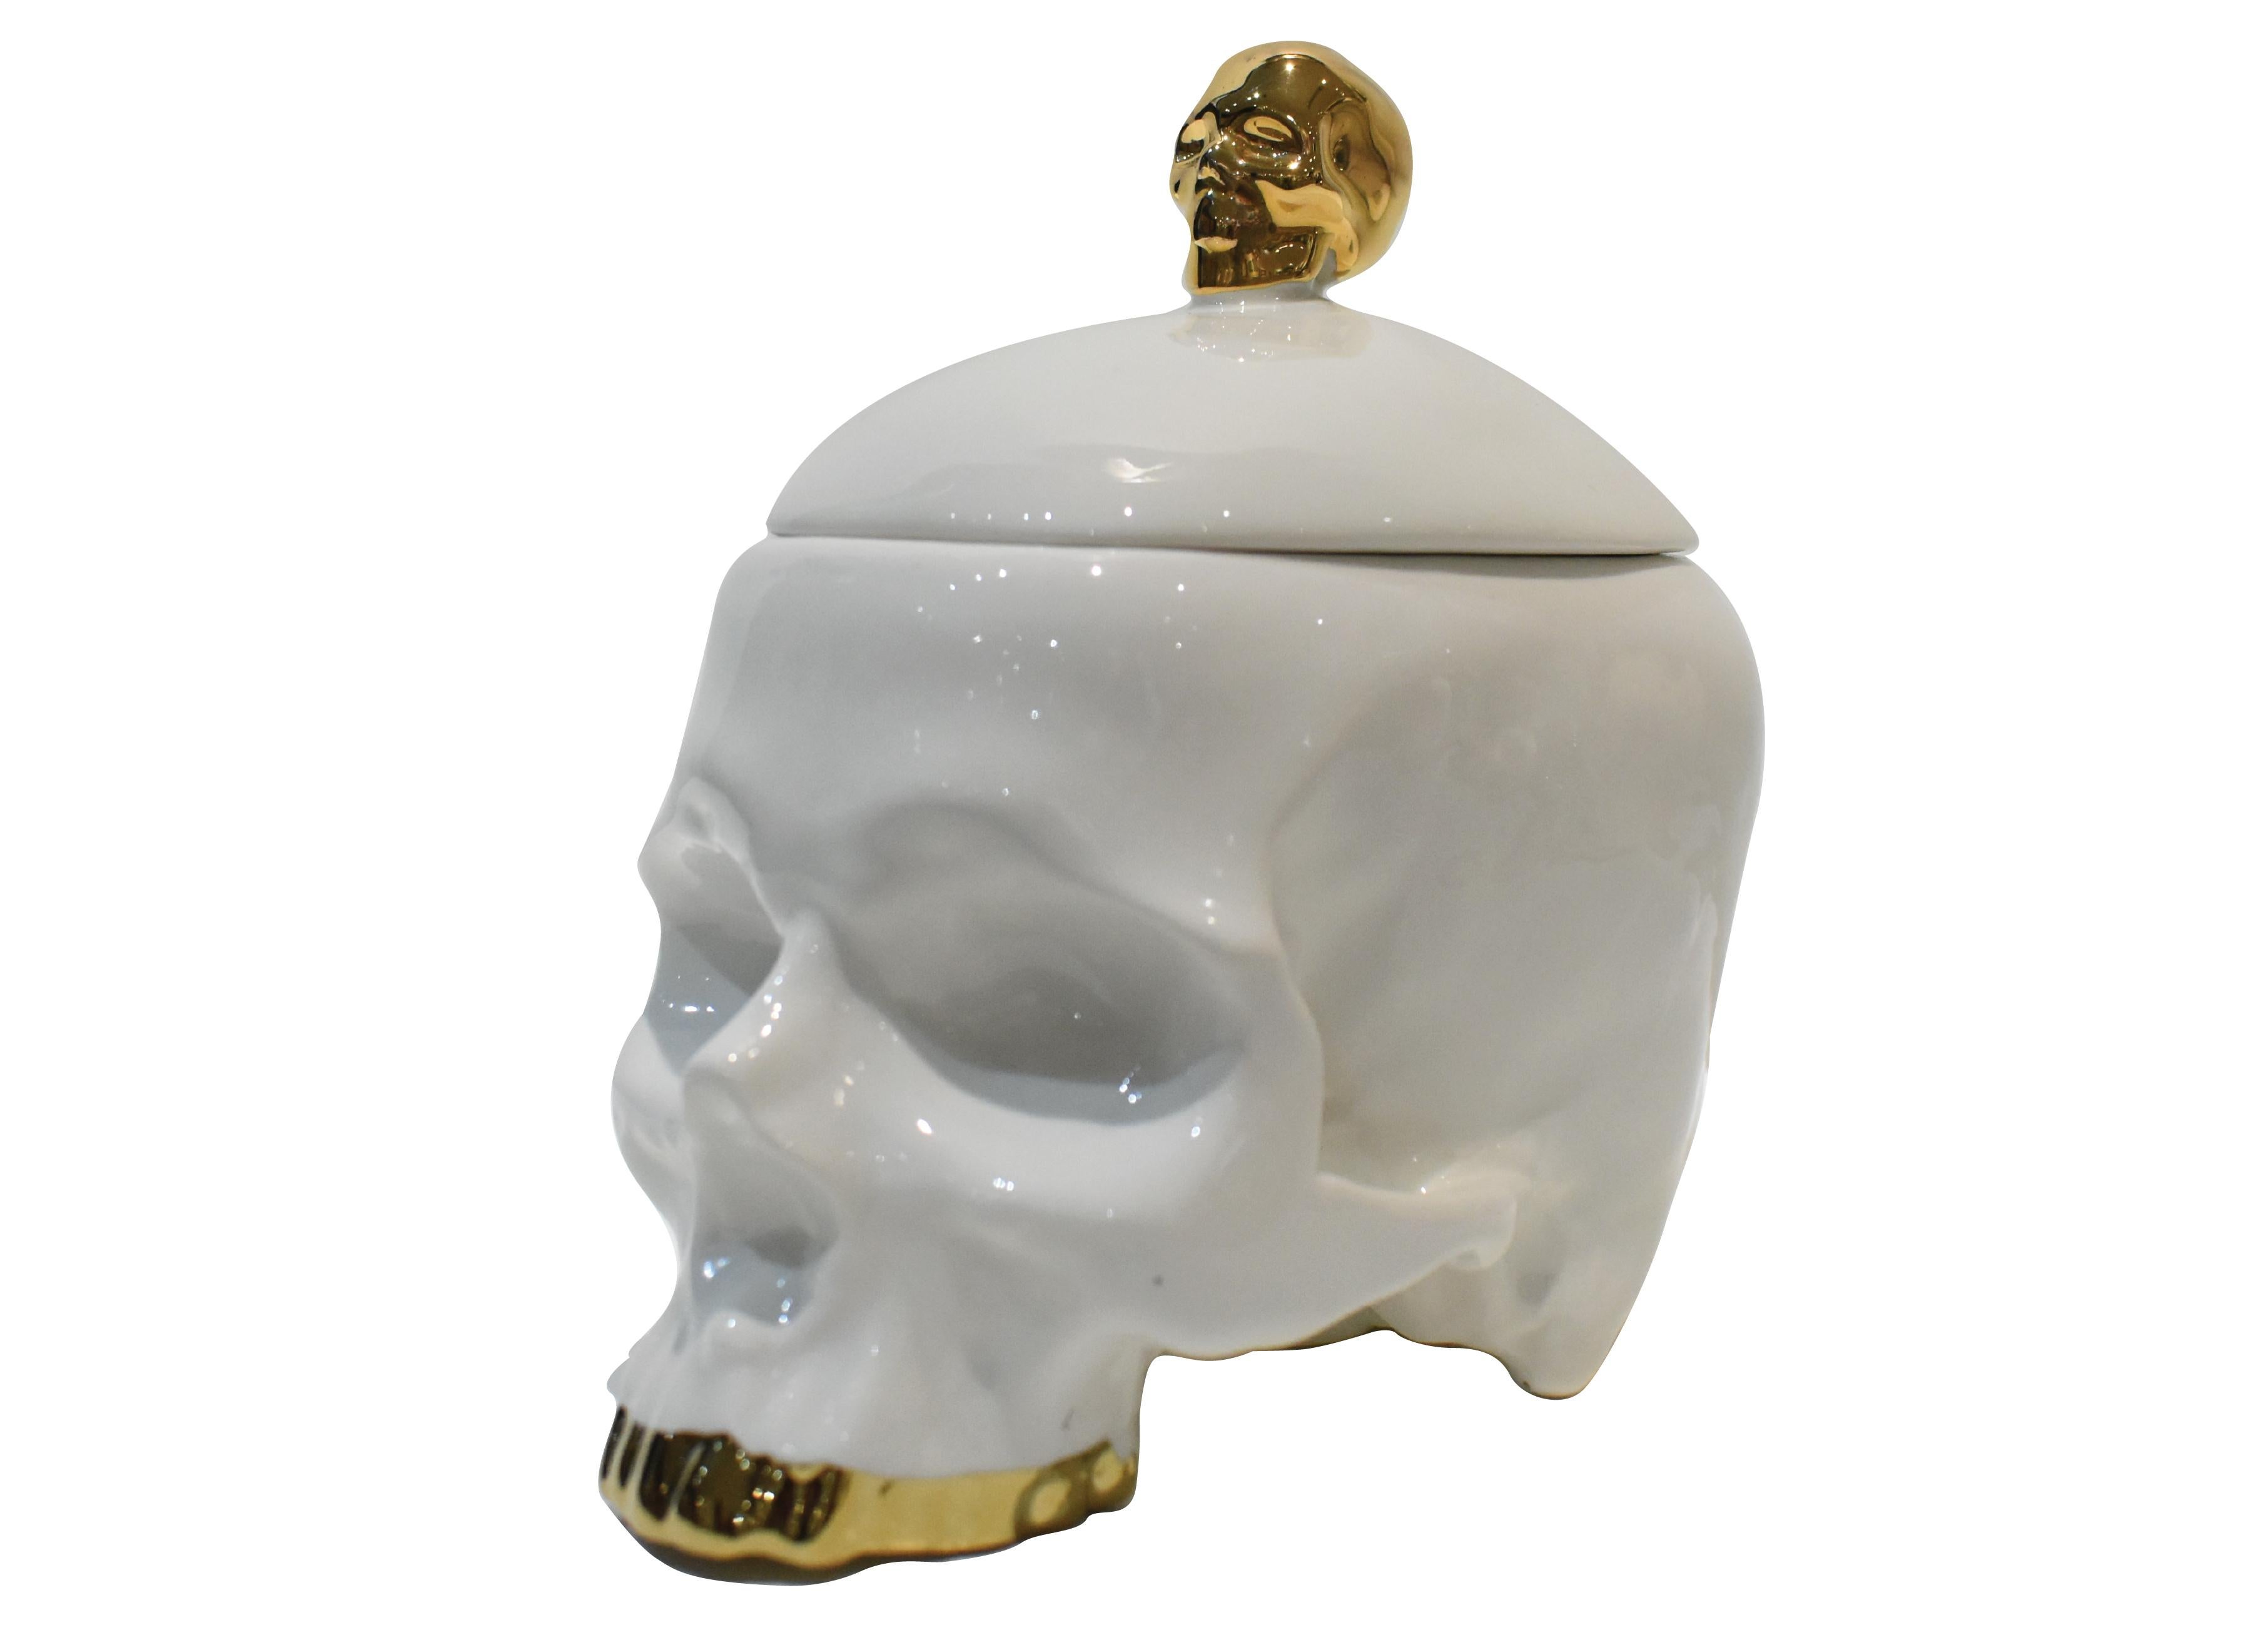 Huang Yulong Figurative Sculpture - Porcelain Sculpture With Skull Shape In White & Gold Color, Removable Cover